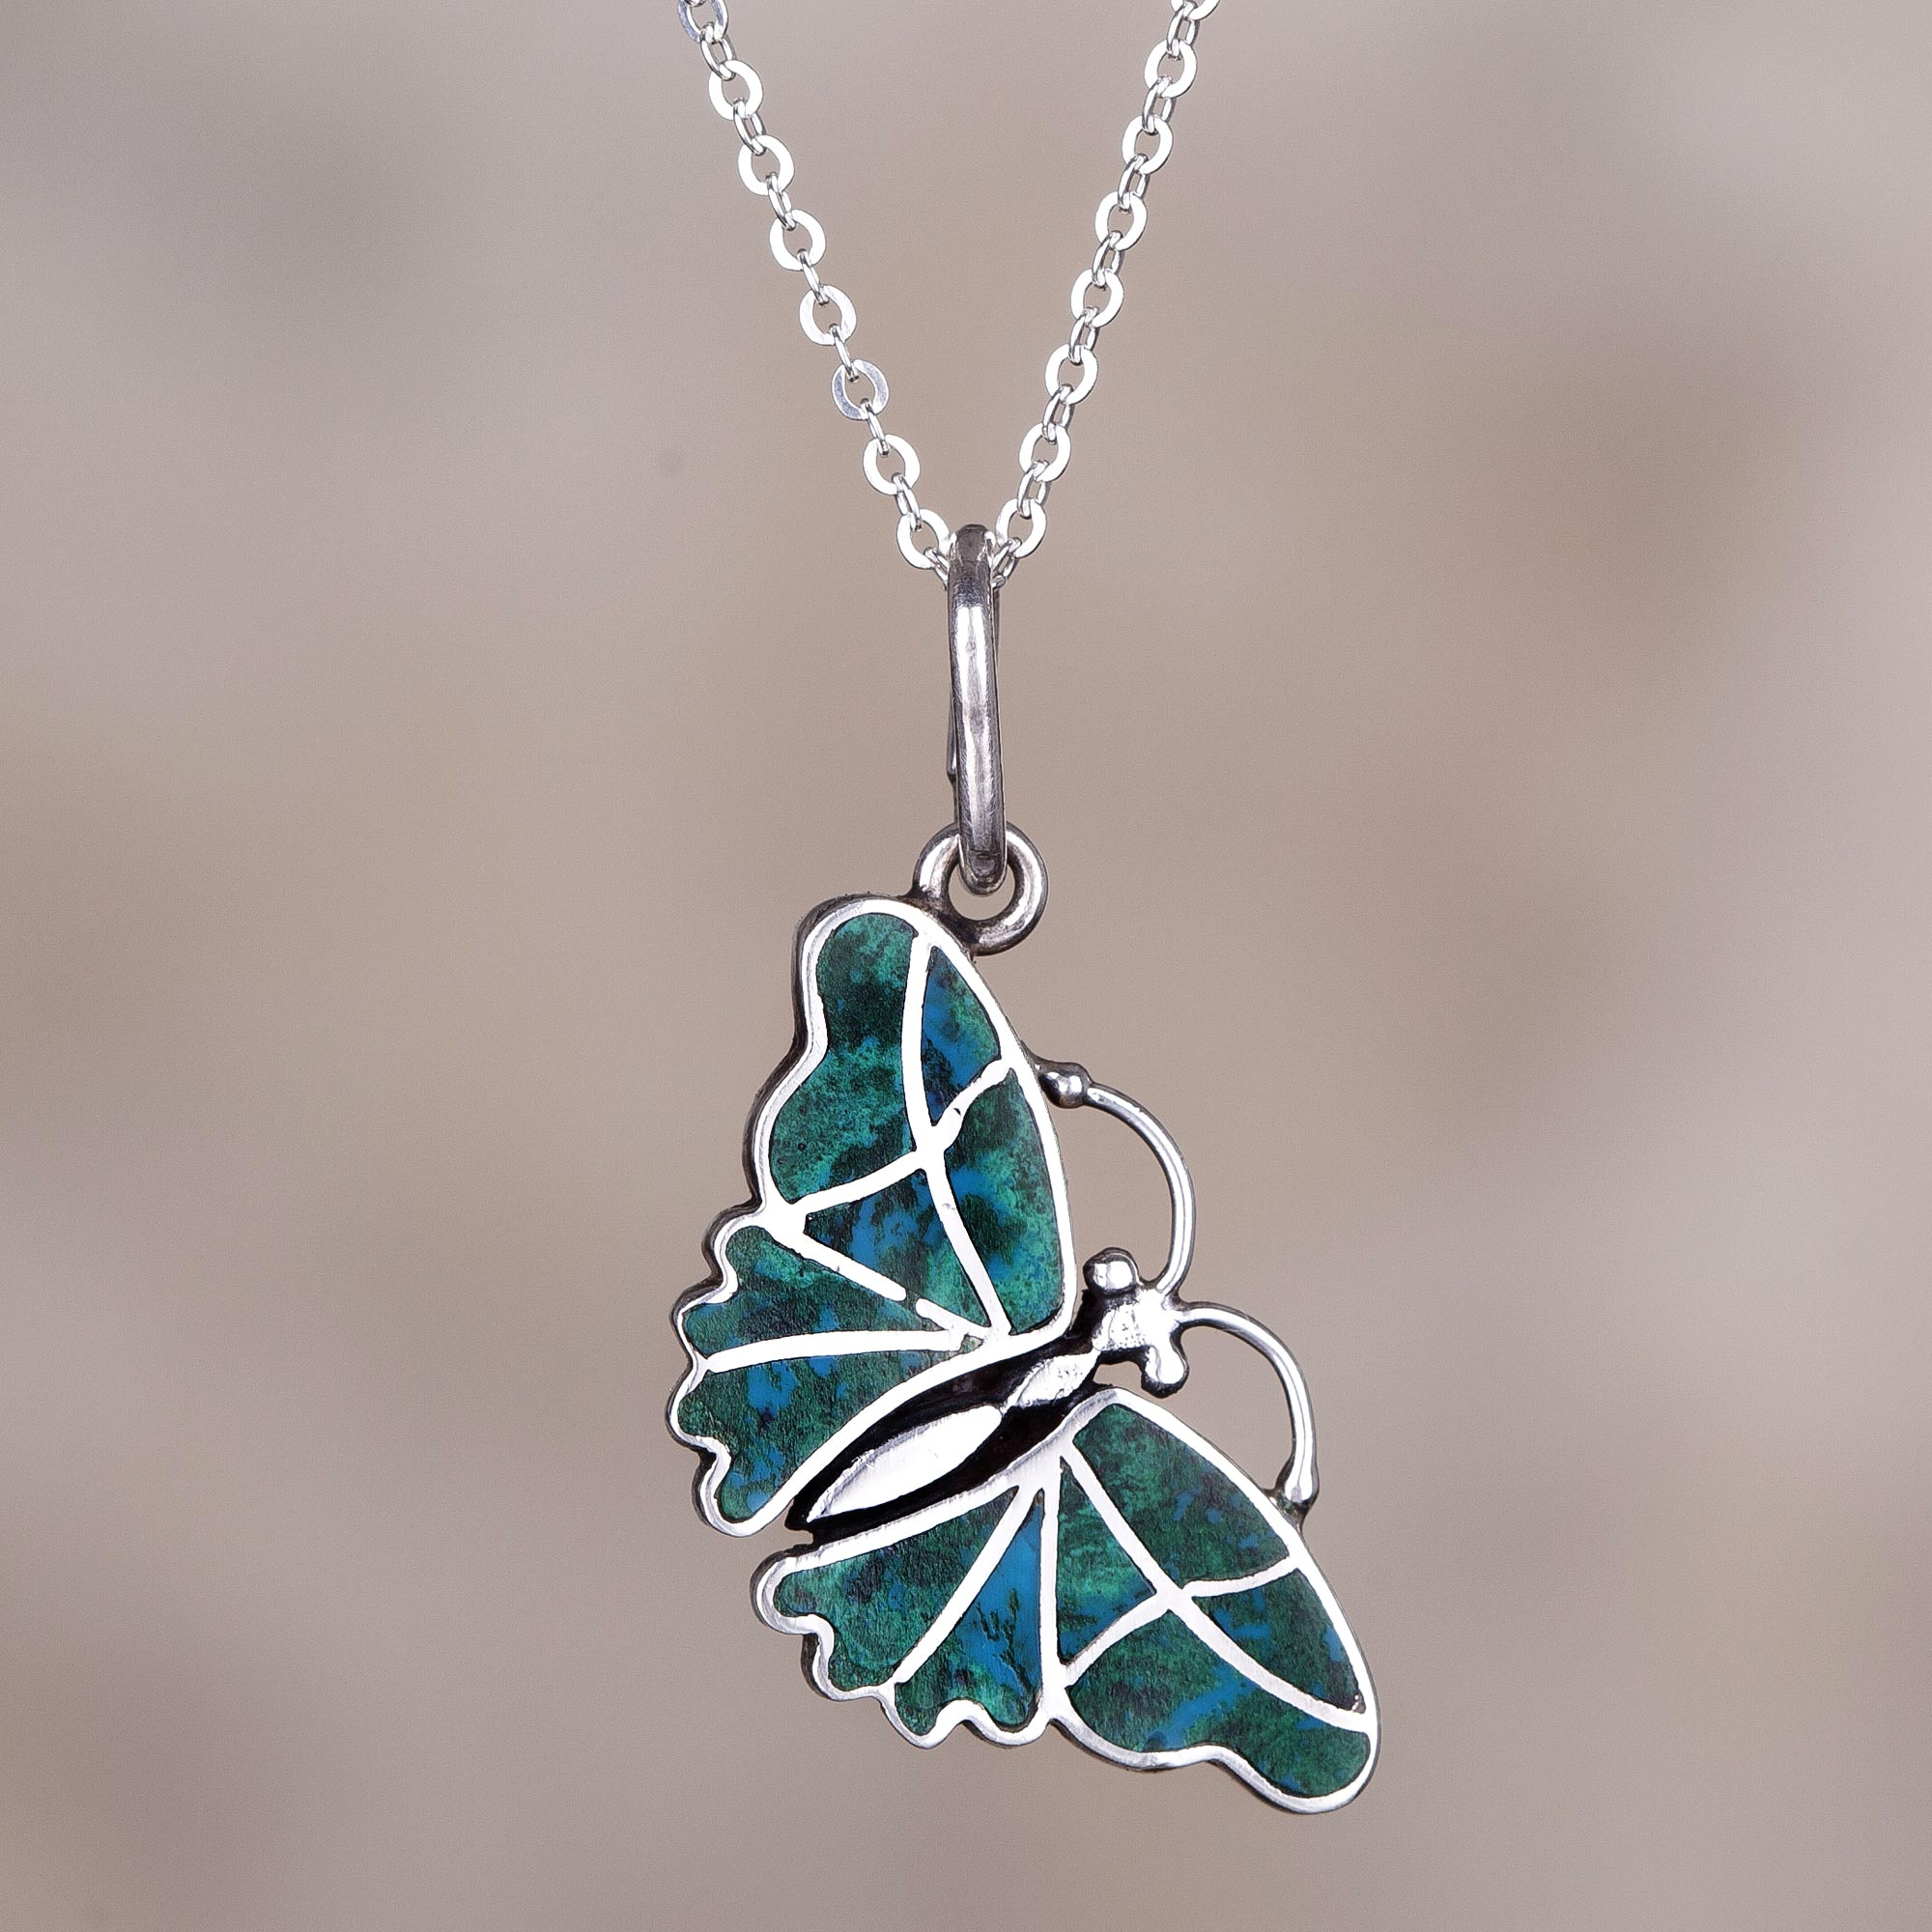 Fair Trade from Peru Butterfly Wing Reversible Jewelry Nickel Pendant for Necklace